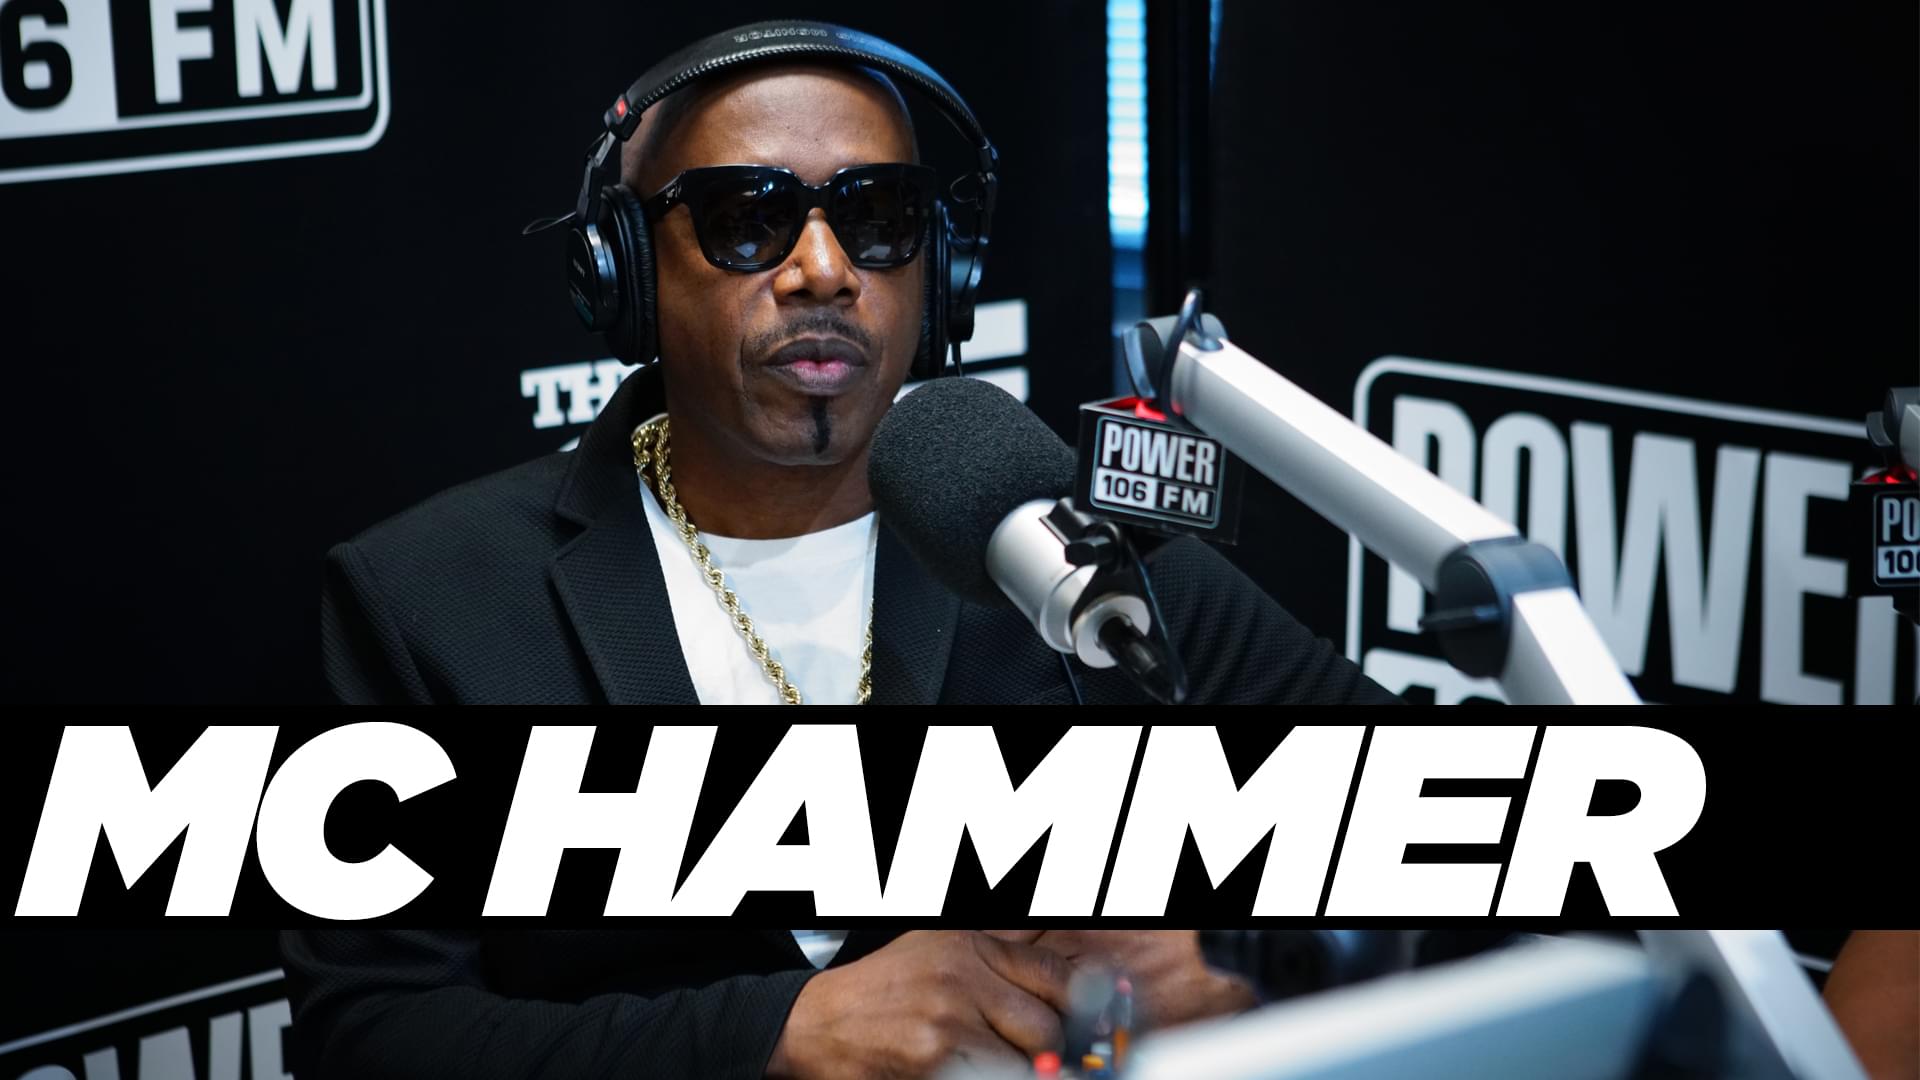 MC Hammer On New Music, Working With 2Pac, Prince, And Death Row, + MORE on #TheCruzShow [WATCH]